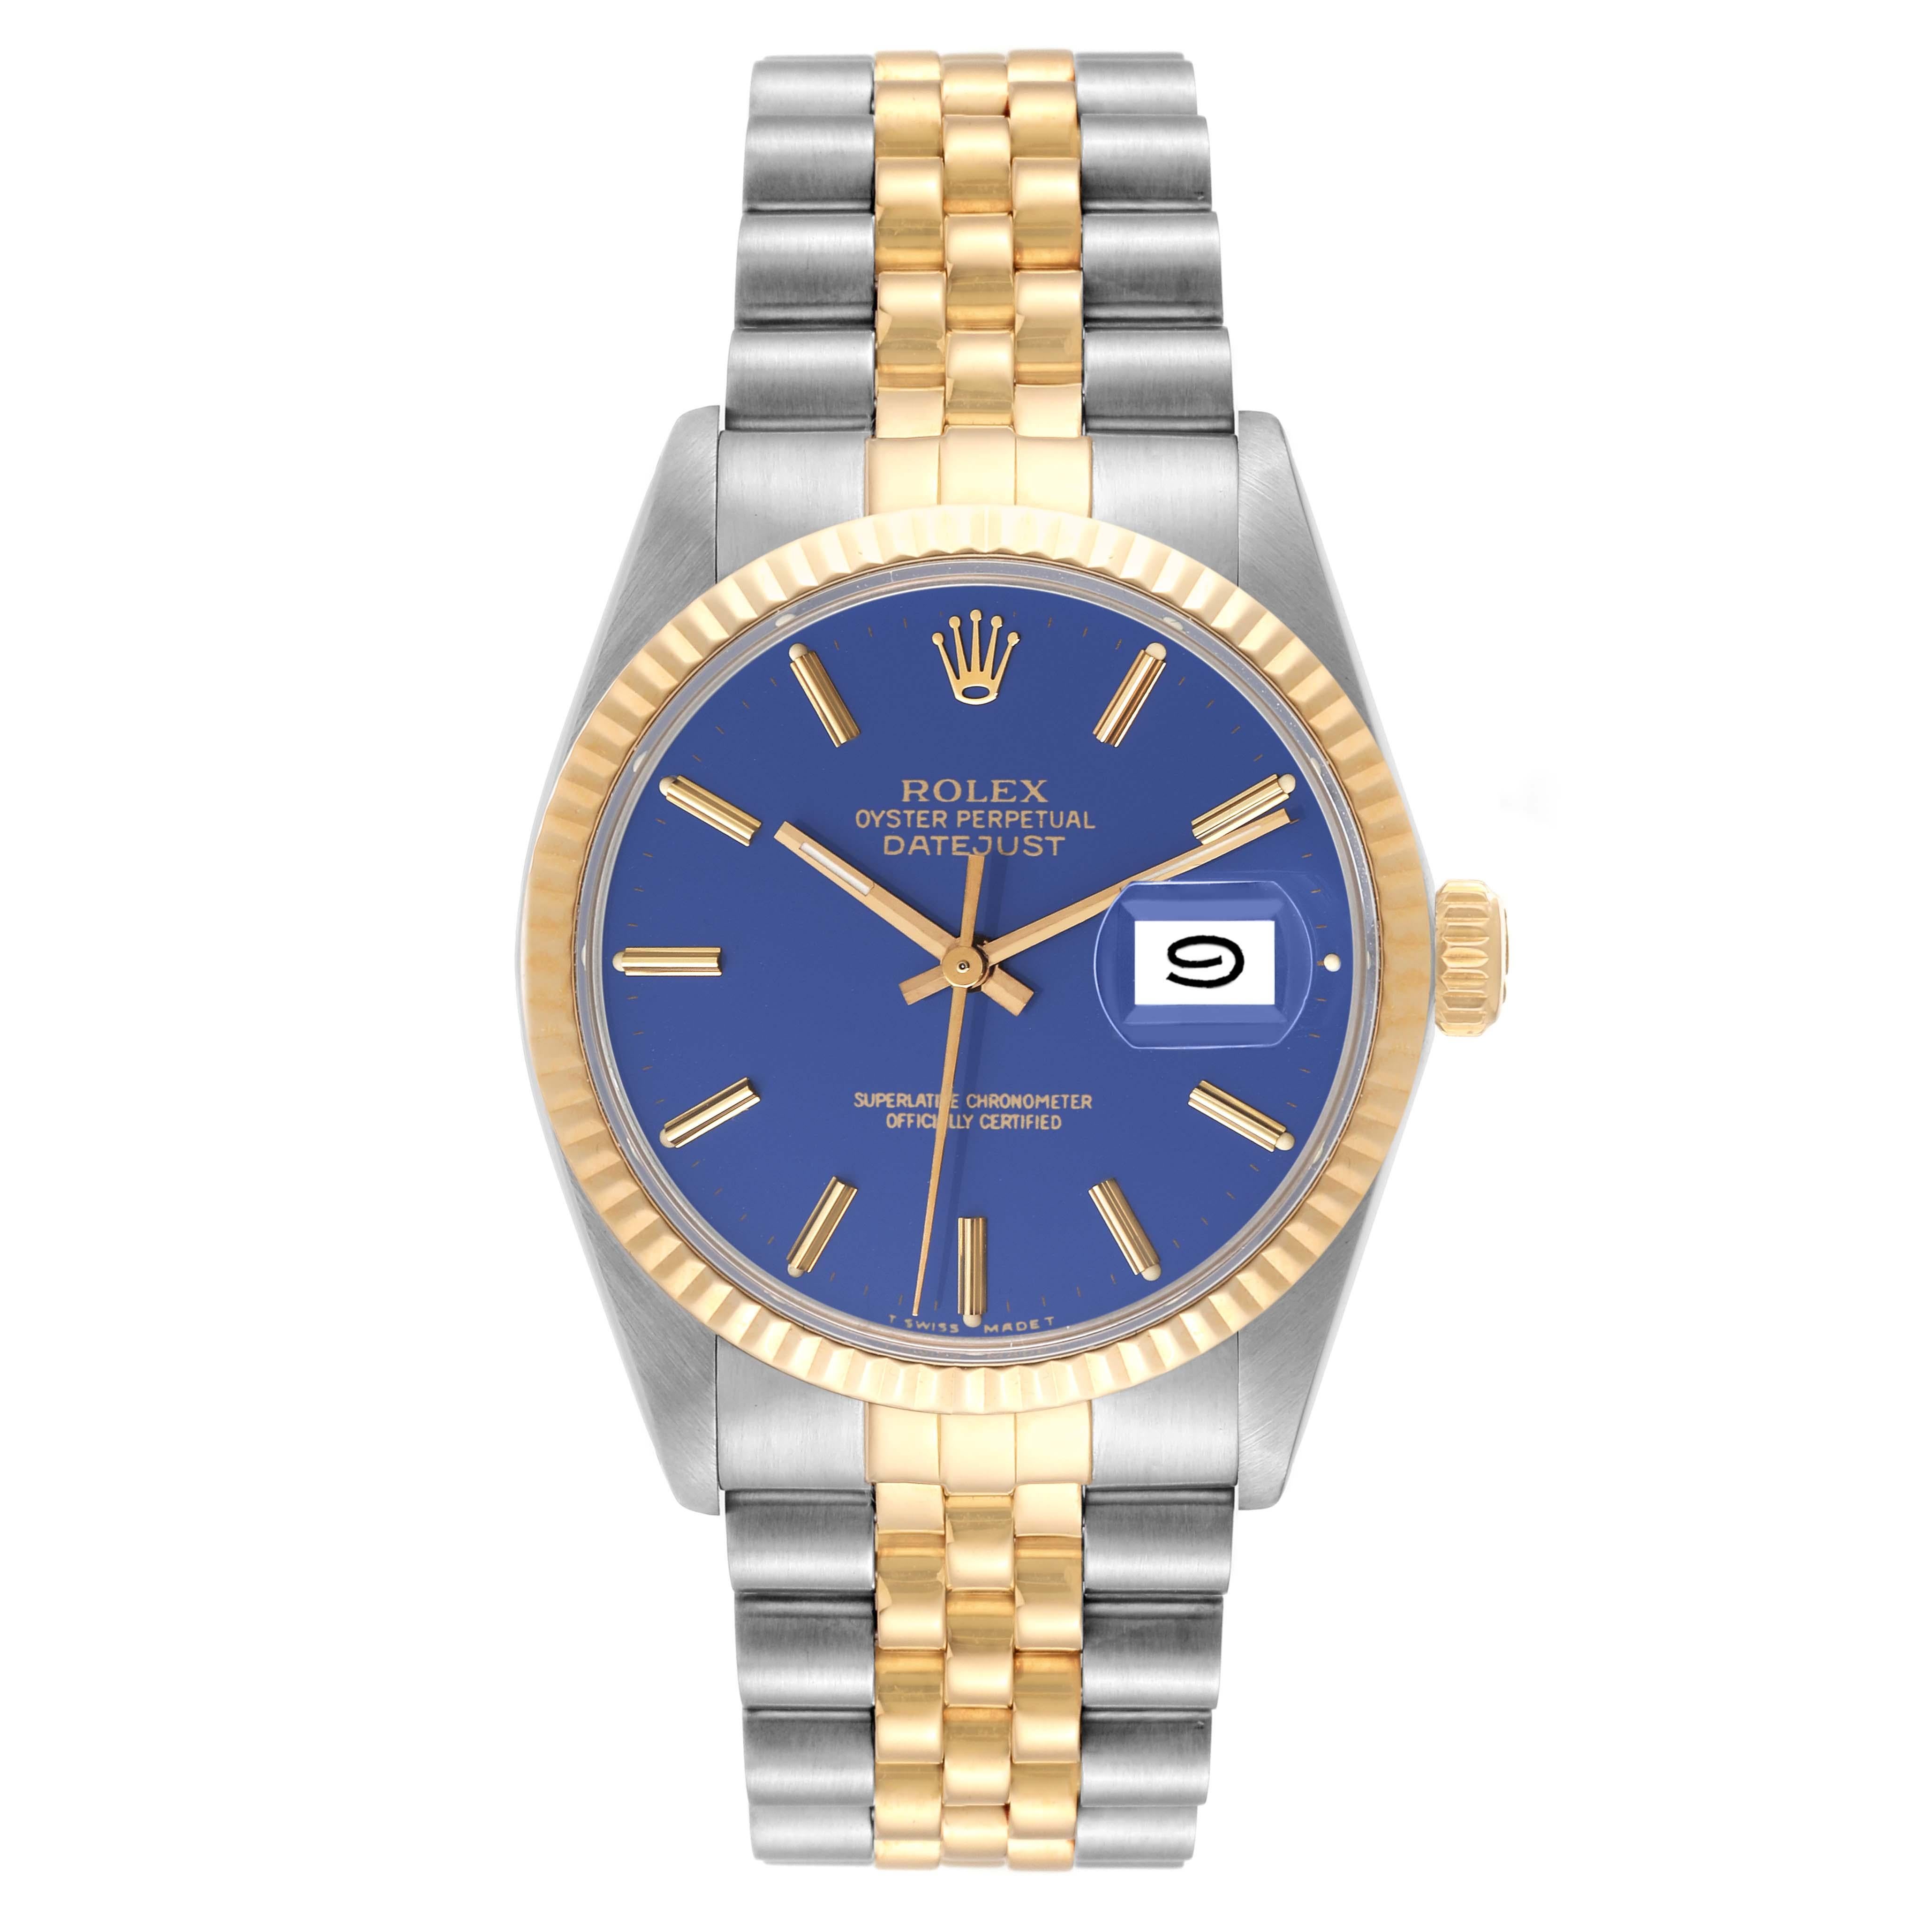 Rolex Datejust Steel Yellow Gold Blue Dial Vintage Mens Watch 16013 Box Papers. Officially certified chronometer automatic self-winding movement. Stainless steel and 18K yellow gold oyster case 36.0 mm in diameter. Rolex logo on an 18k yellow gold